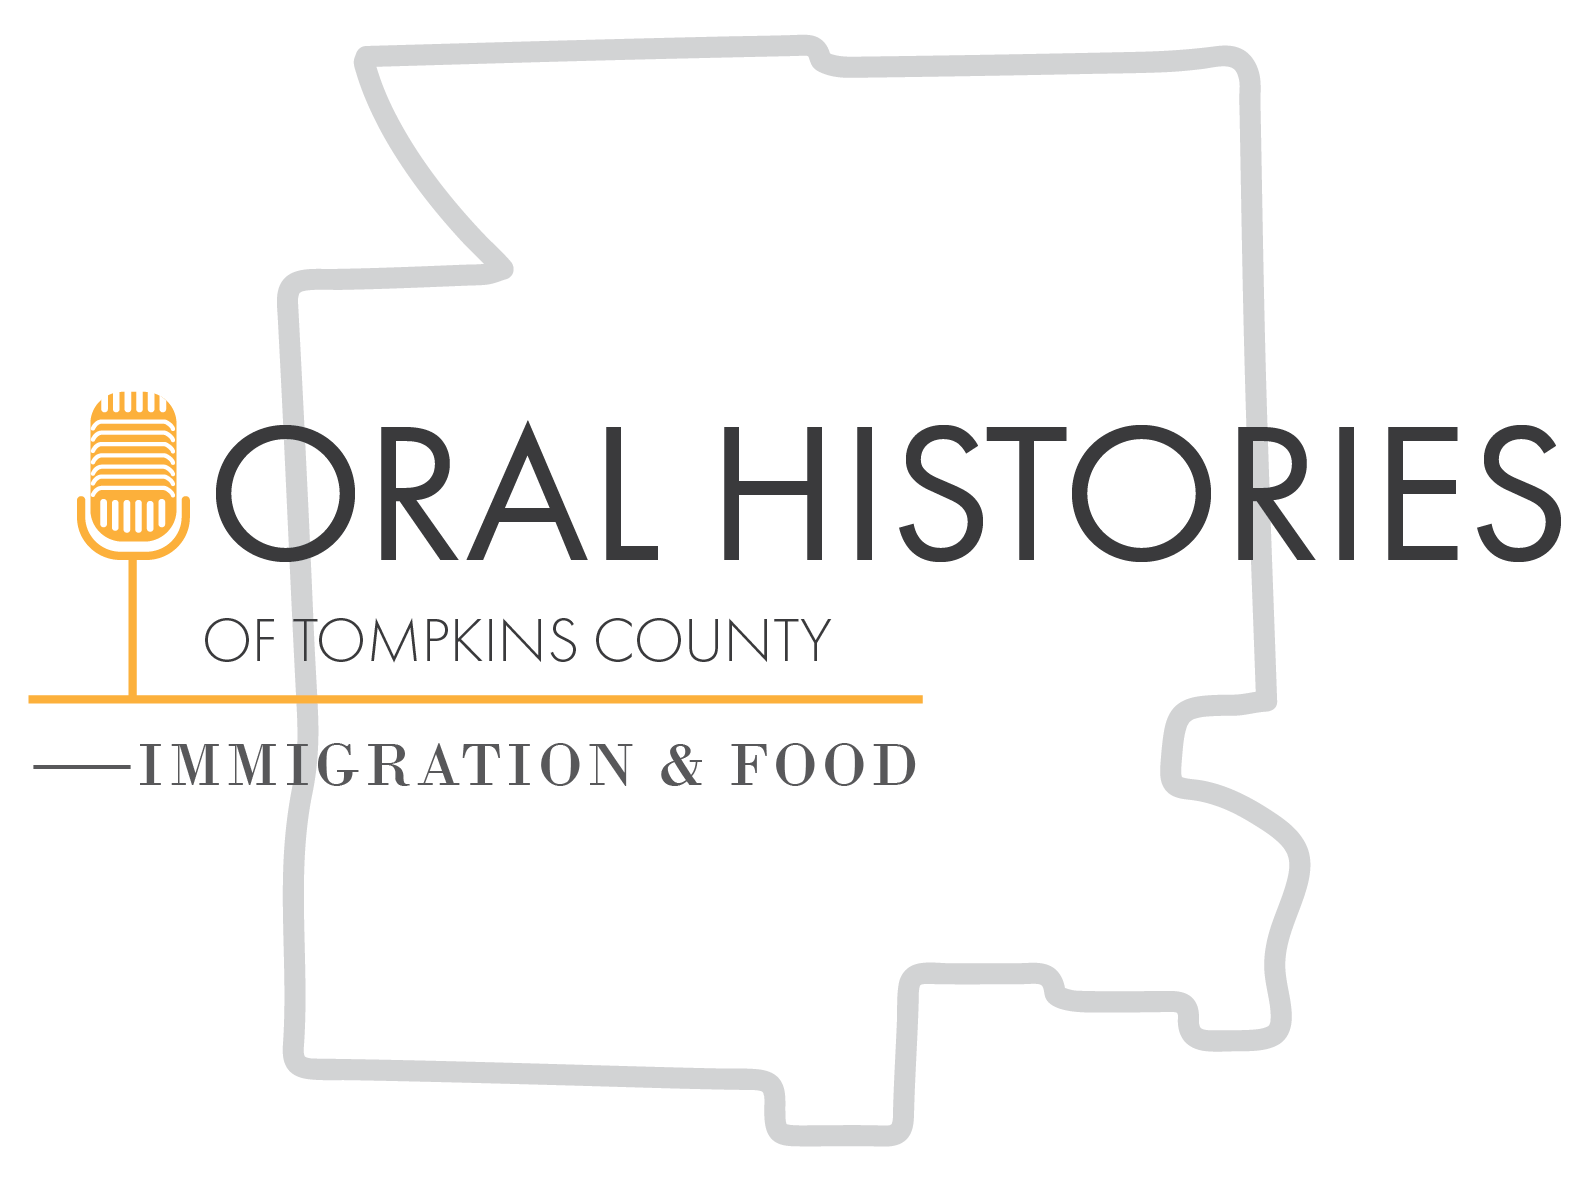 Outline of Tompkins County with a golden microphone and the text 'Oral Histories of Tompkins County - Immigration & Food'